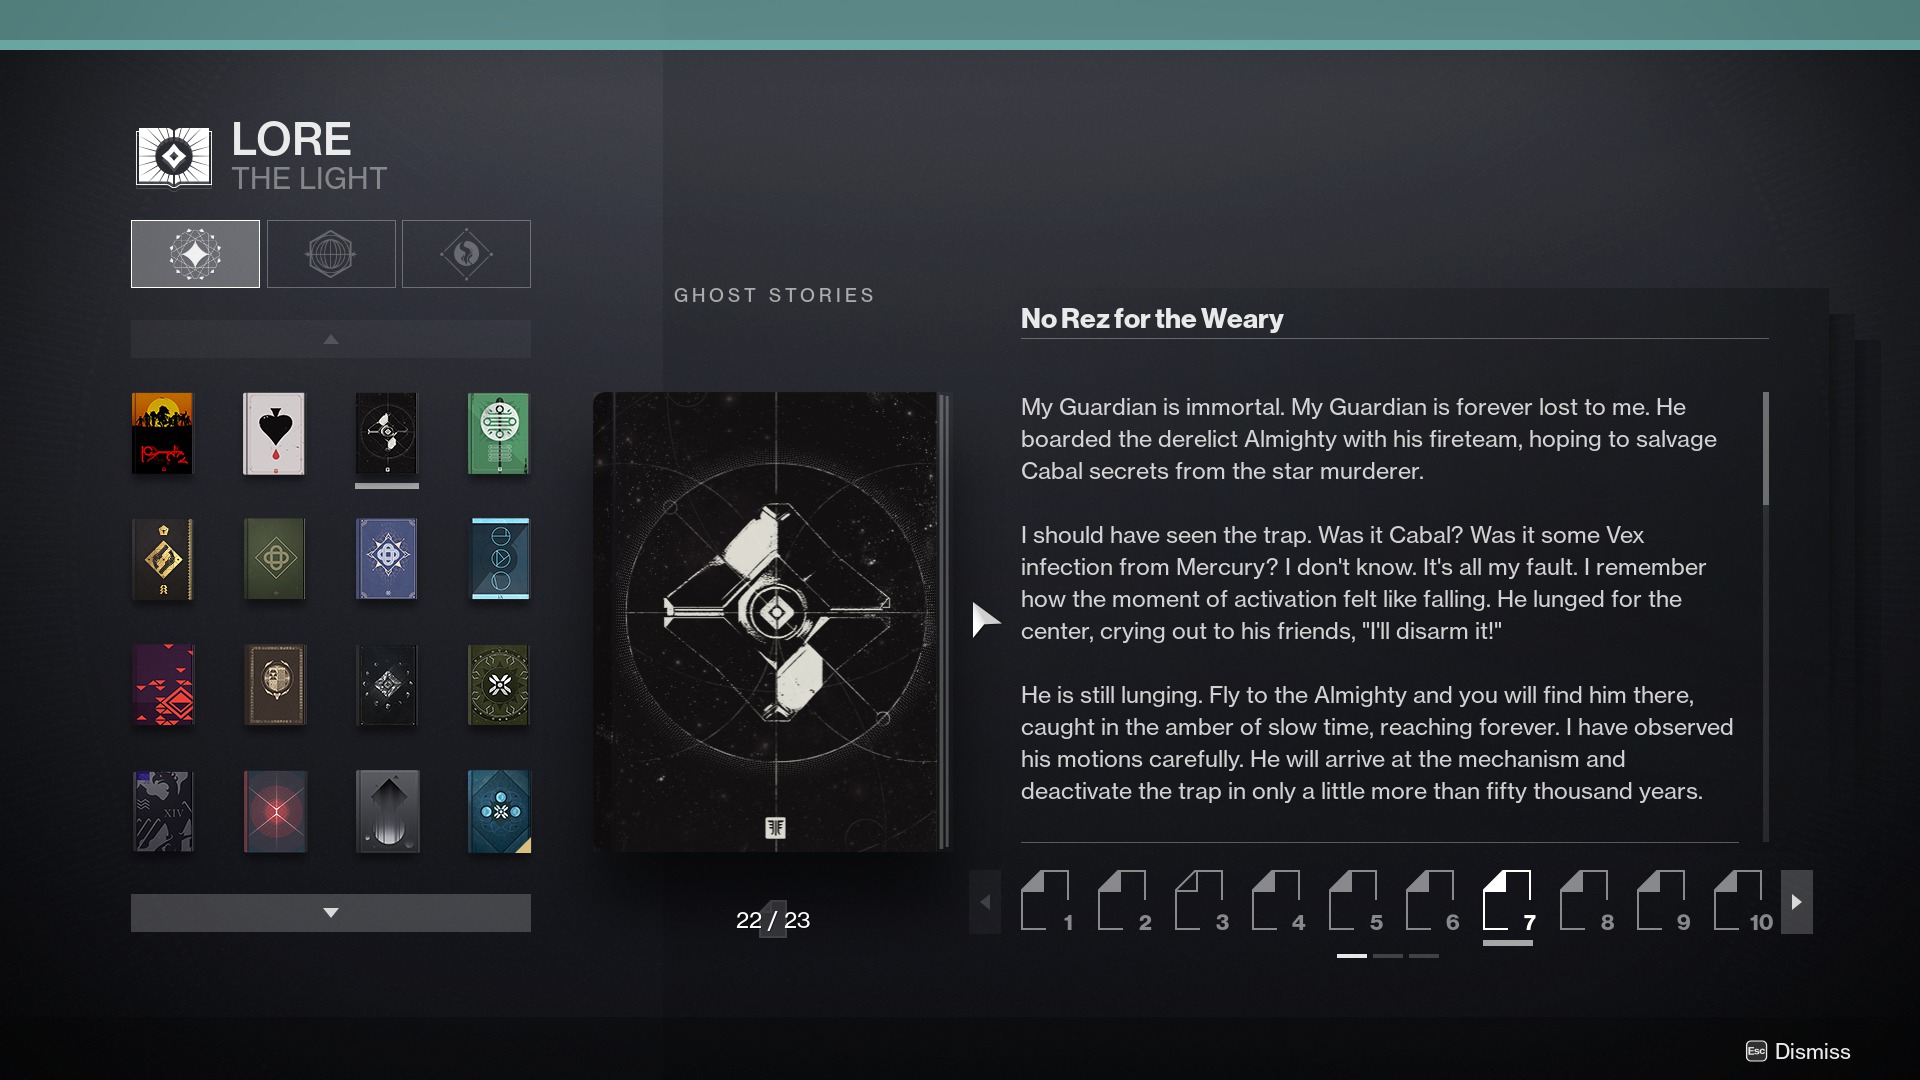 A discovered lore book open for reading—Destiny is a world full of deep and interconnected lore. Players discover and collect pages of various lore books which can be read from this view at their leisure.